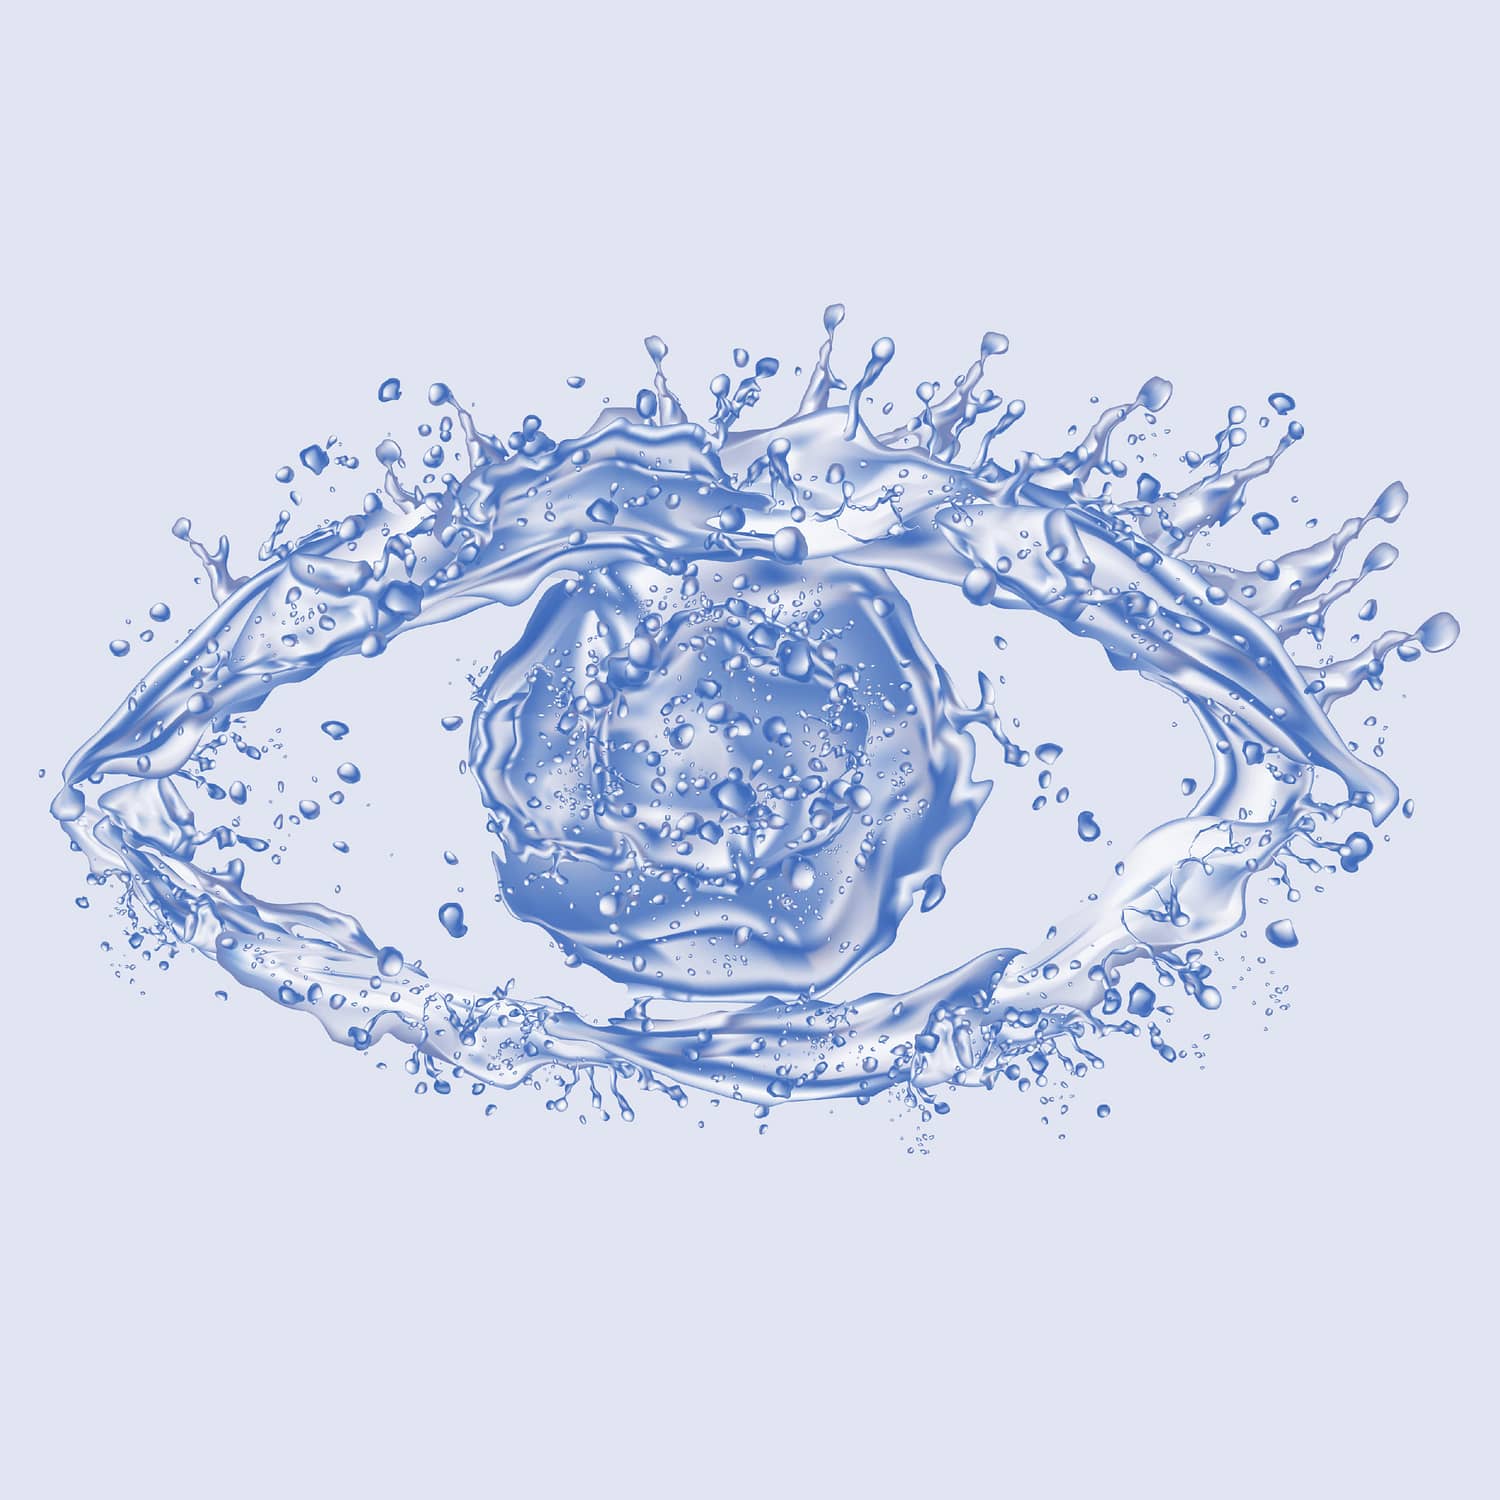 Eye made of water splashes on a blue background